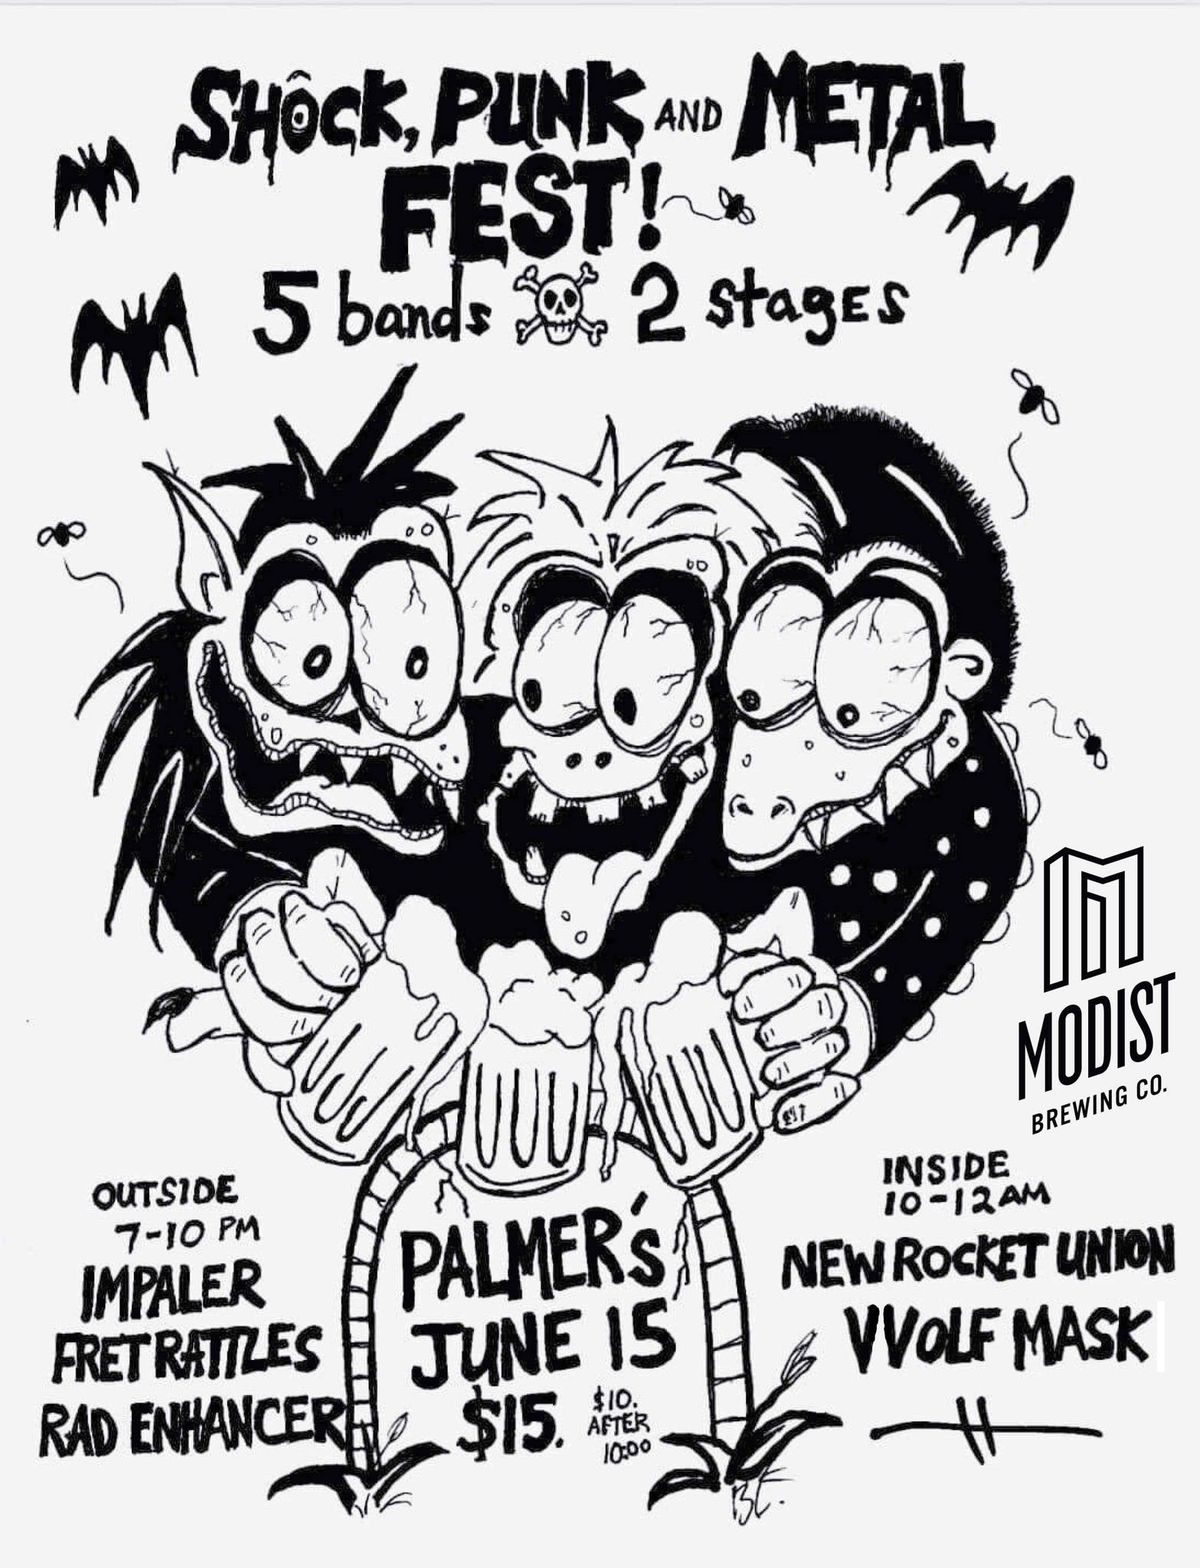 SHOCK, PUNK and METAL FEST